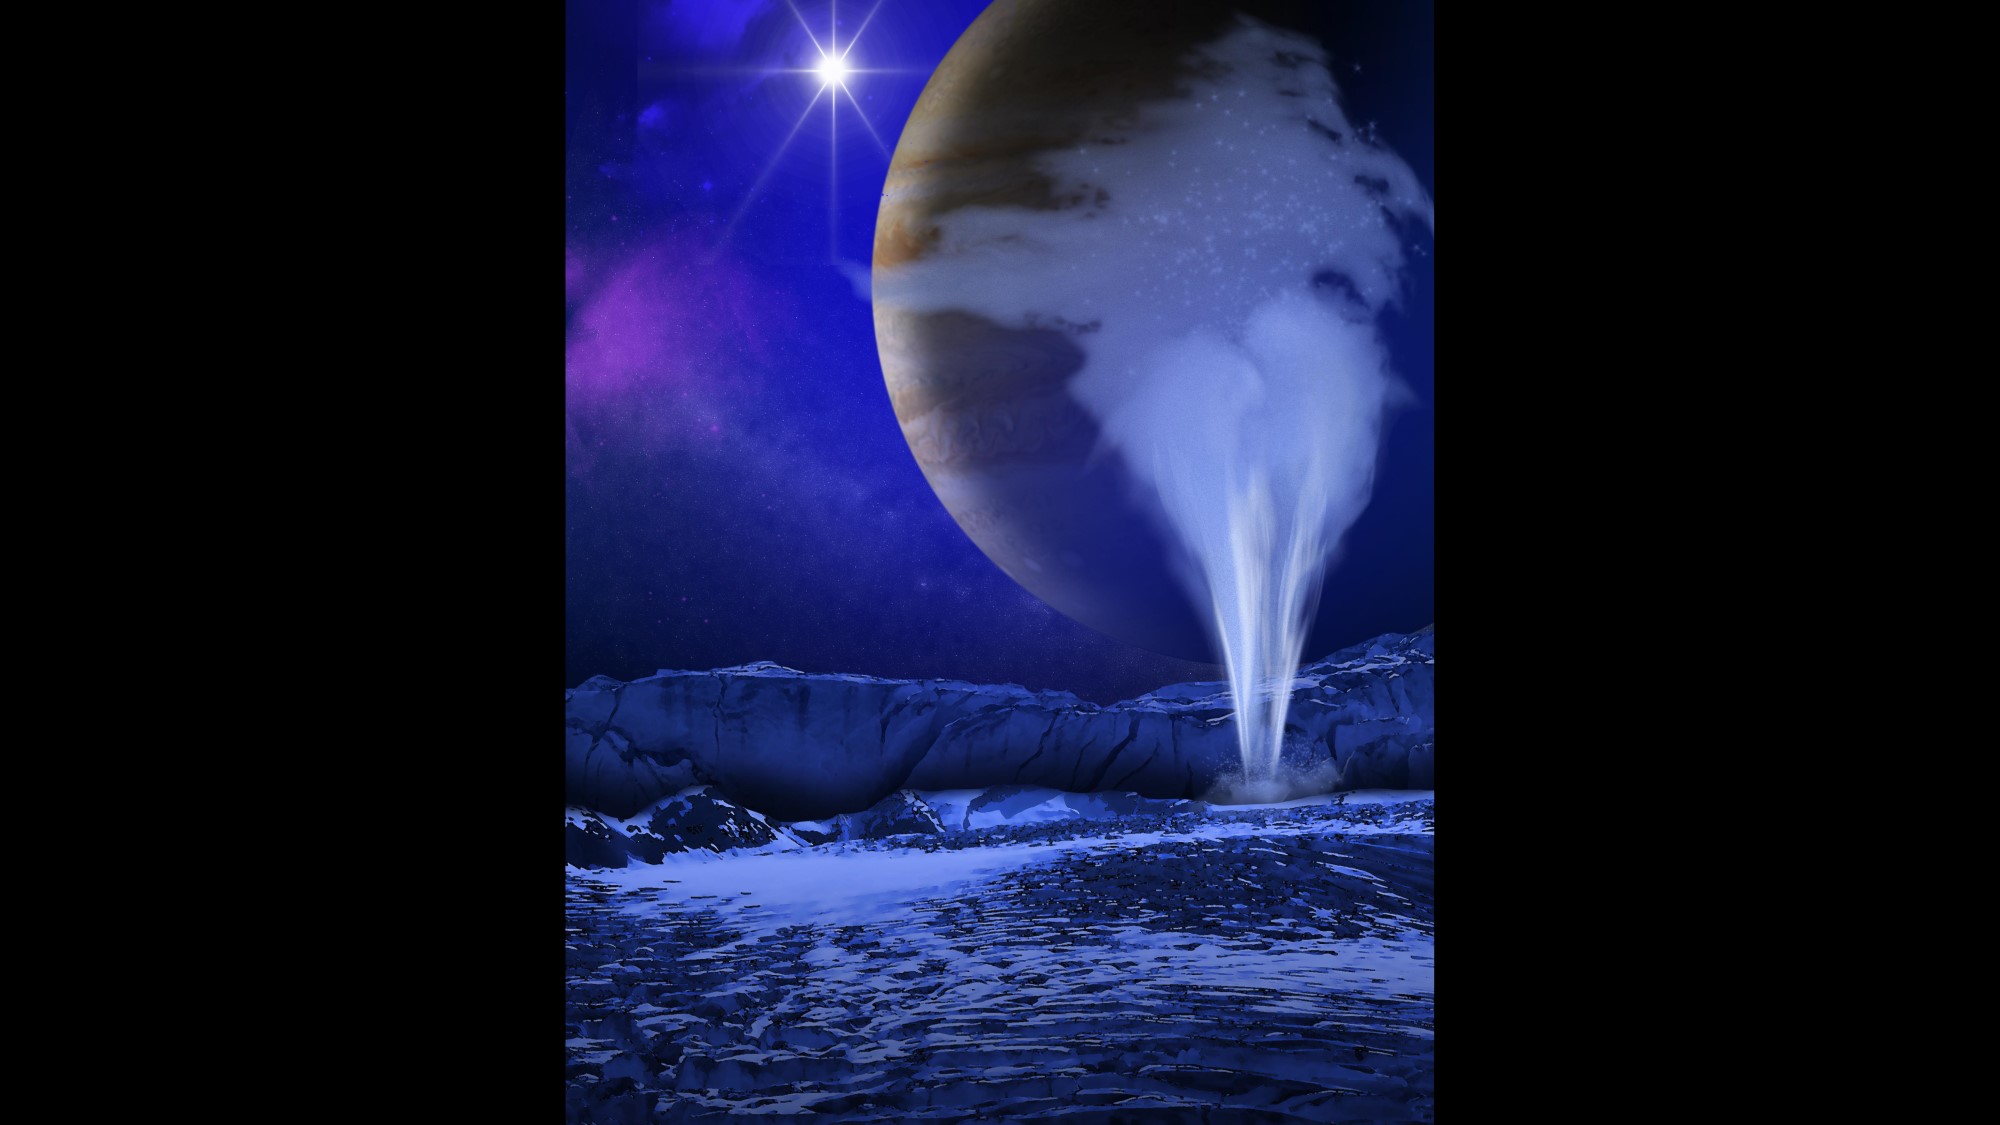 The diagram shows the geyser flying into the Jupiter-dominated sky